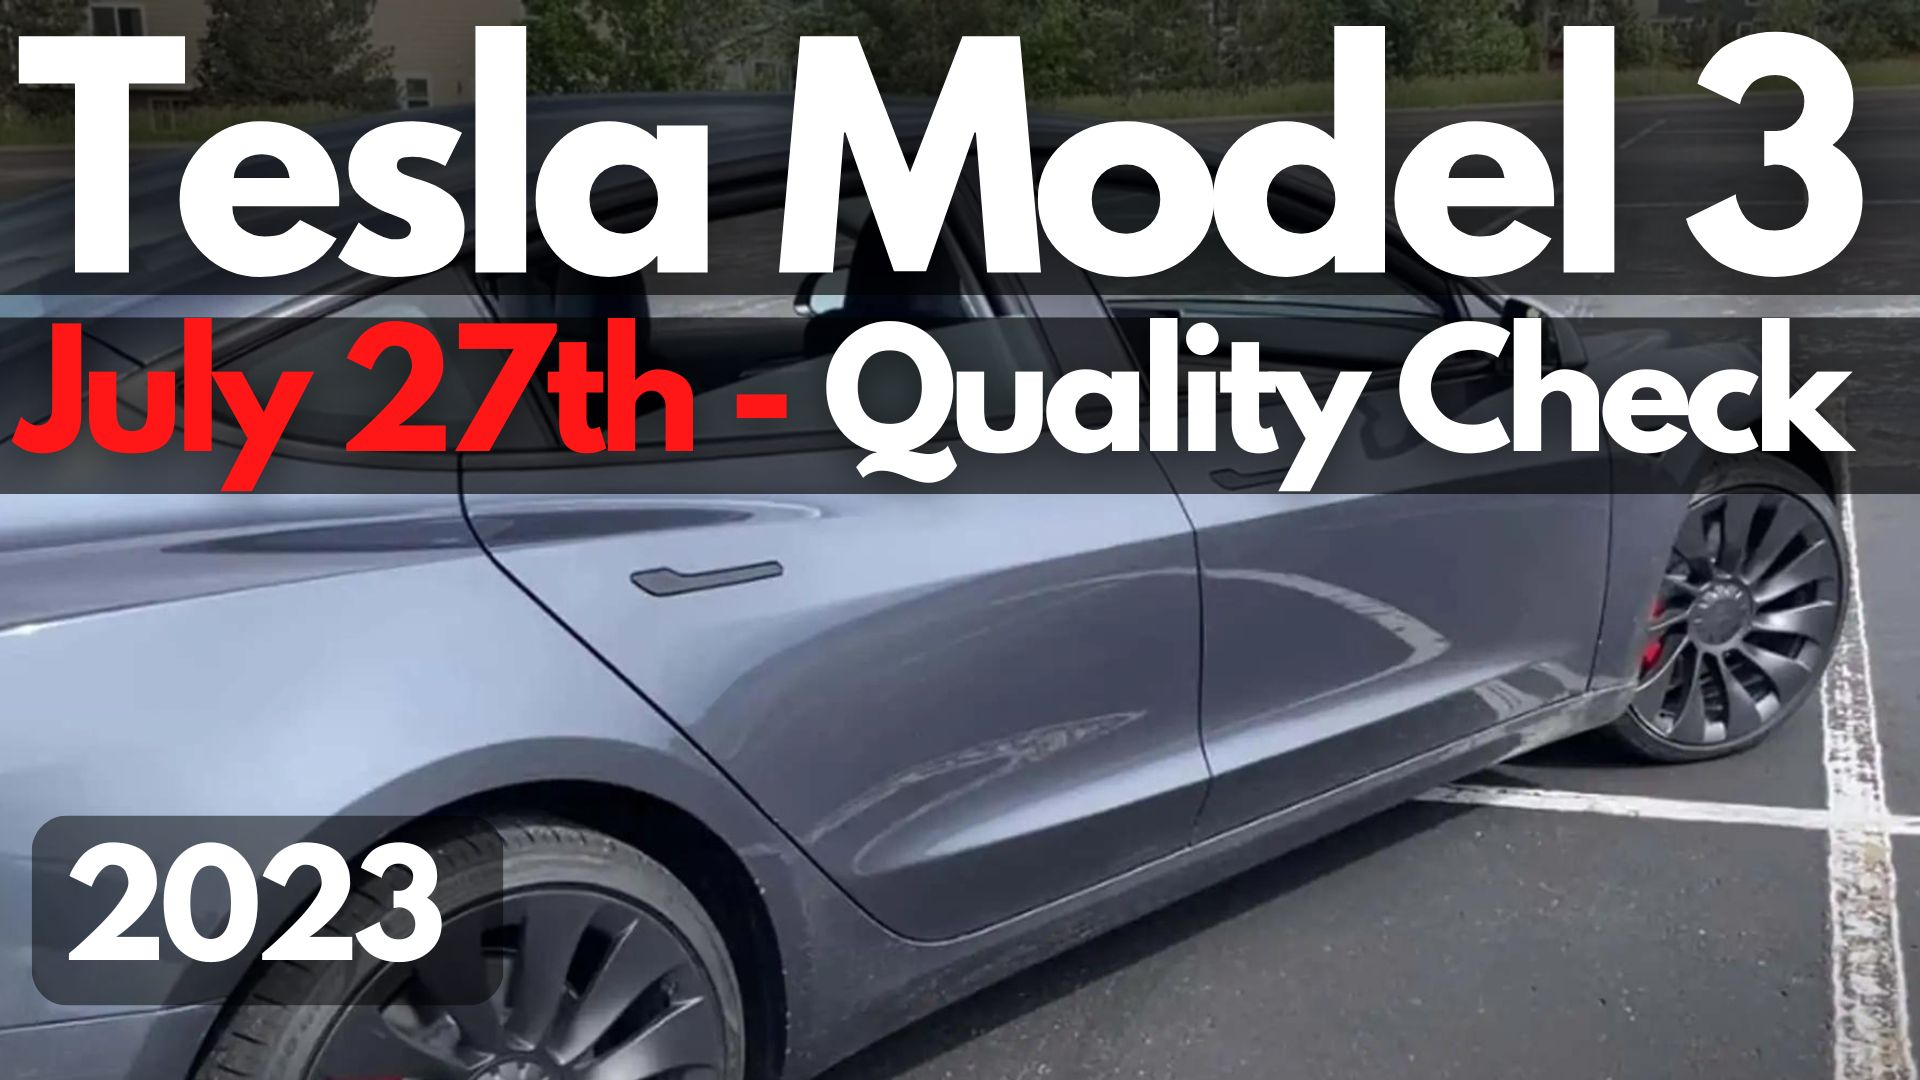 Has Tesla Improved The Model 3 Build Quality For July 23, 2023?